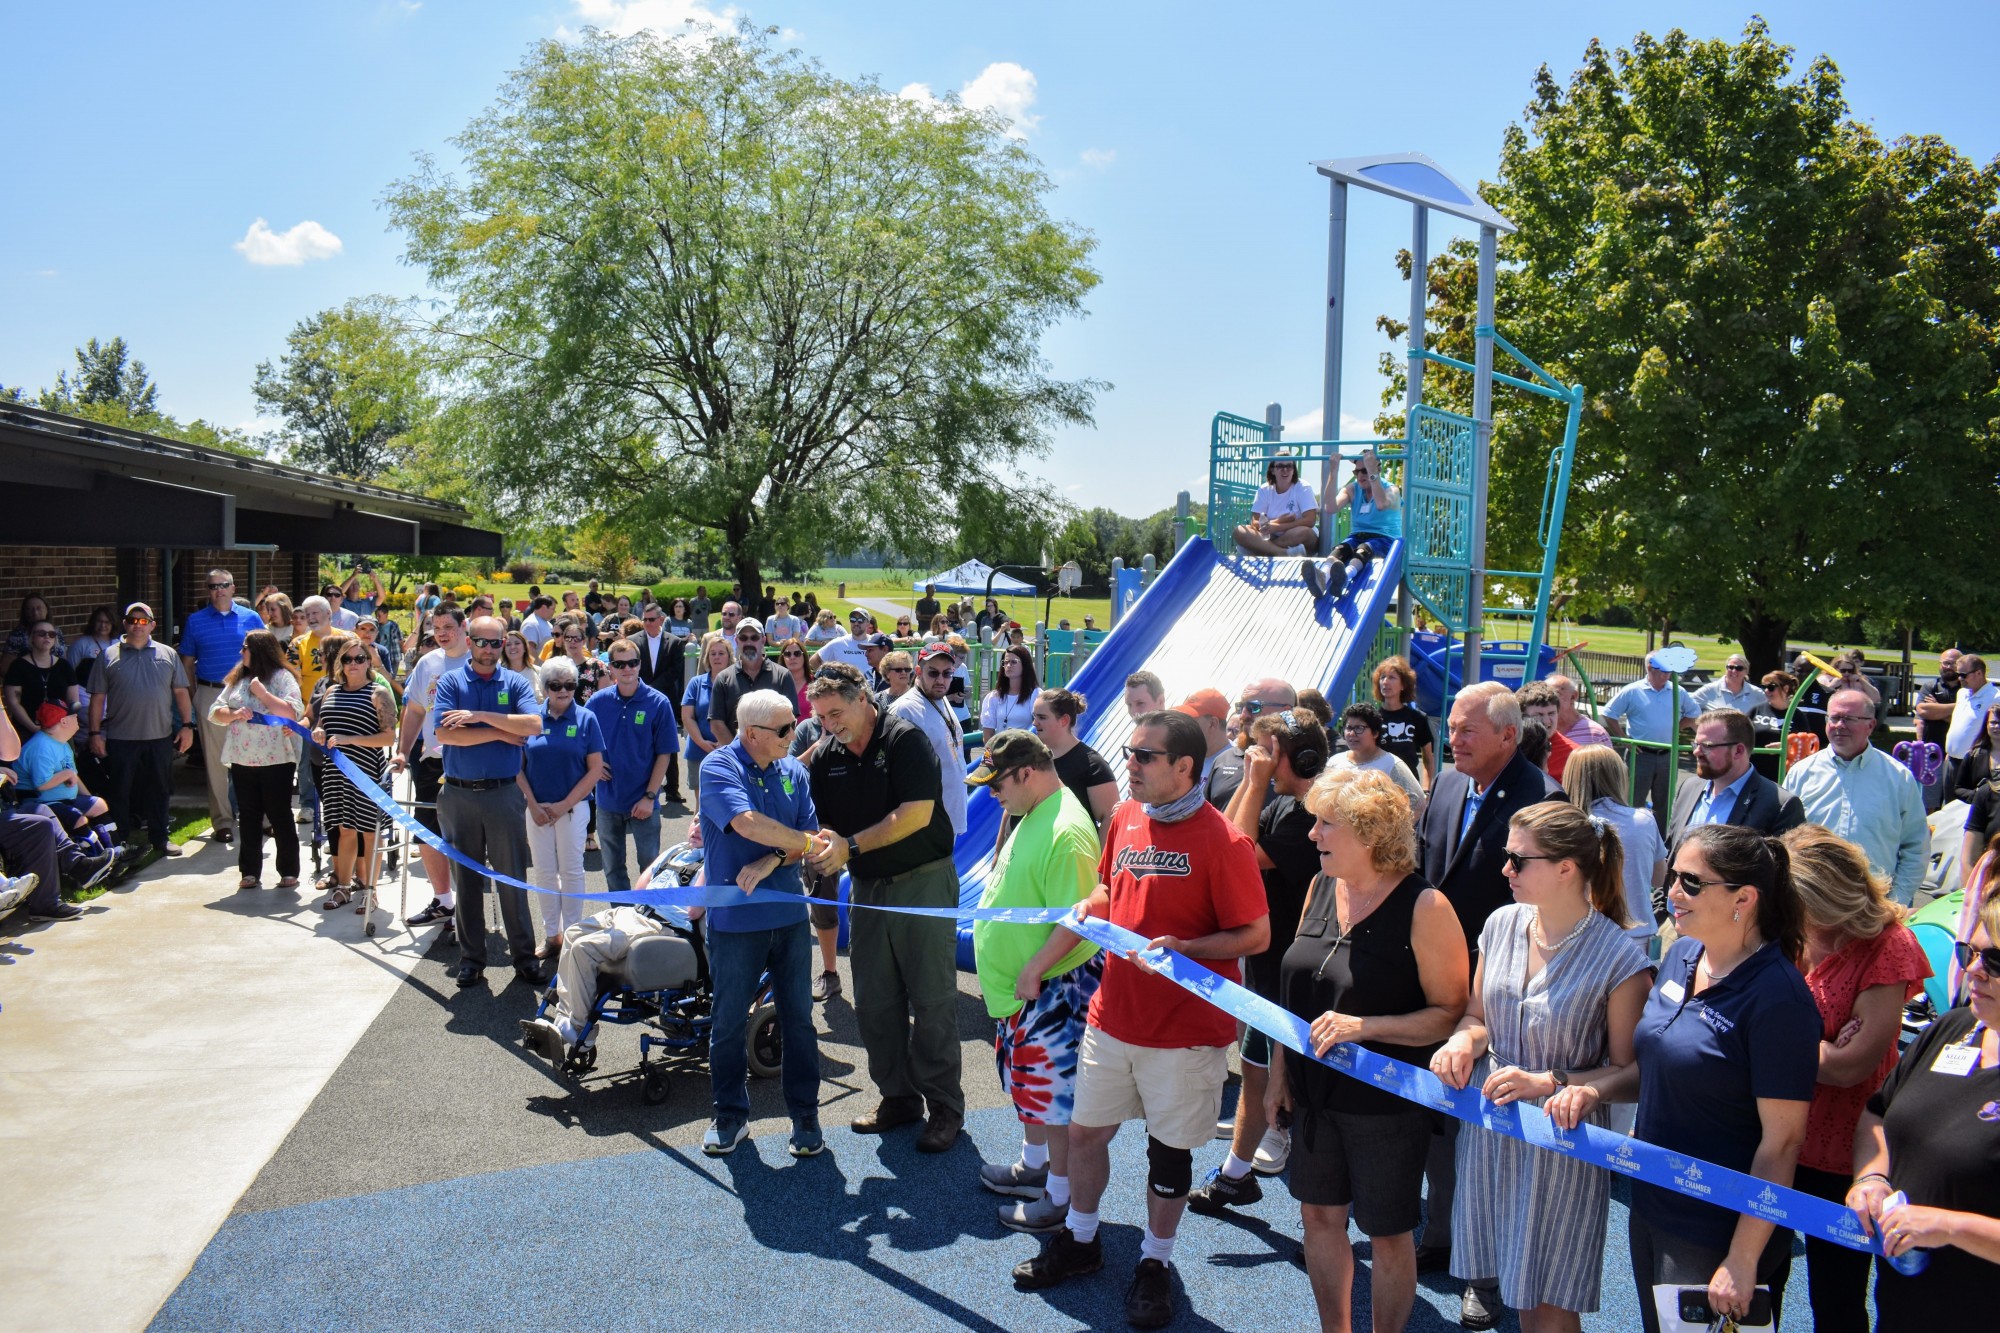 Ribbon Cutting to Celebrate All-Abilities Playground at Opportunity Park